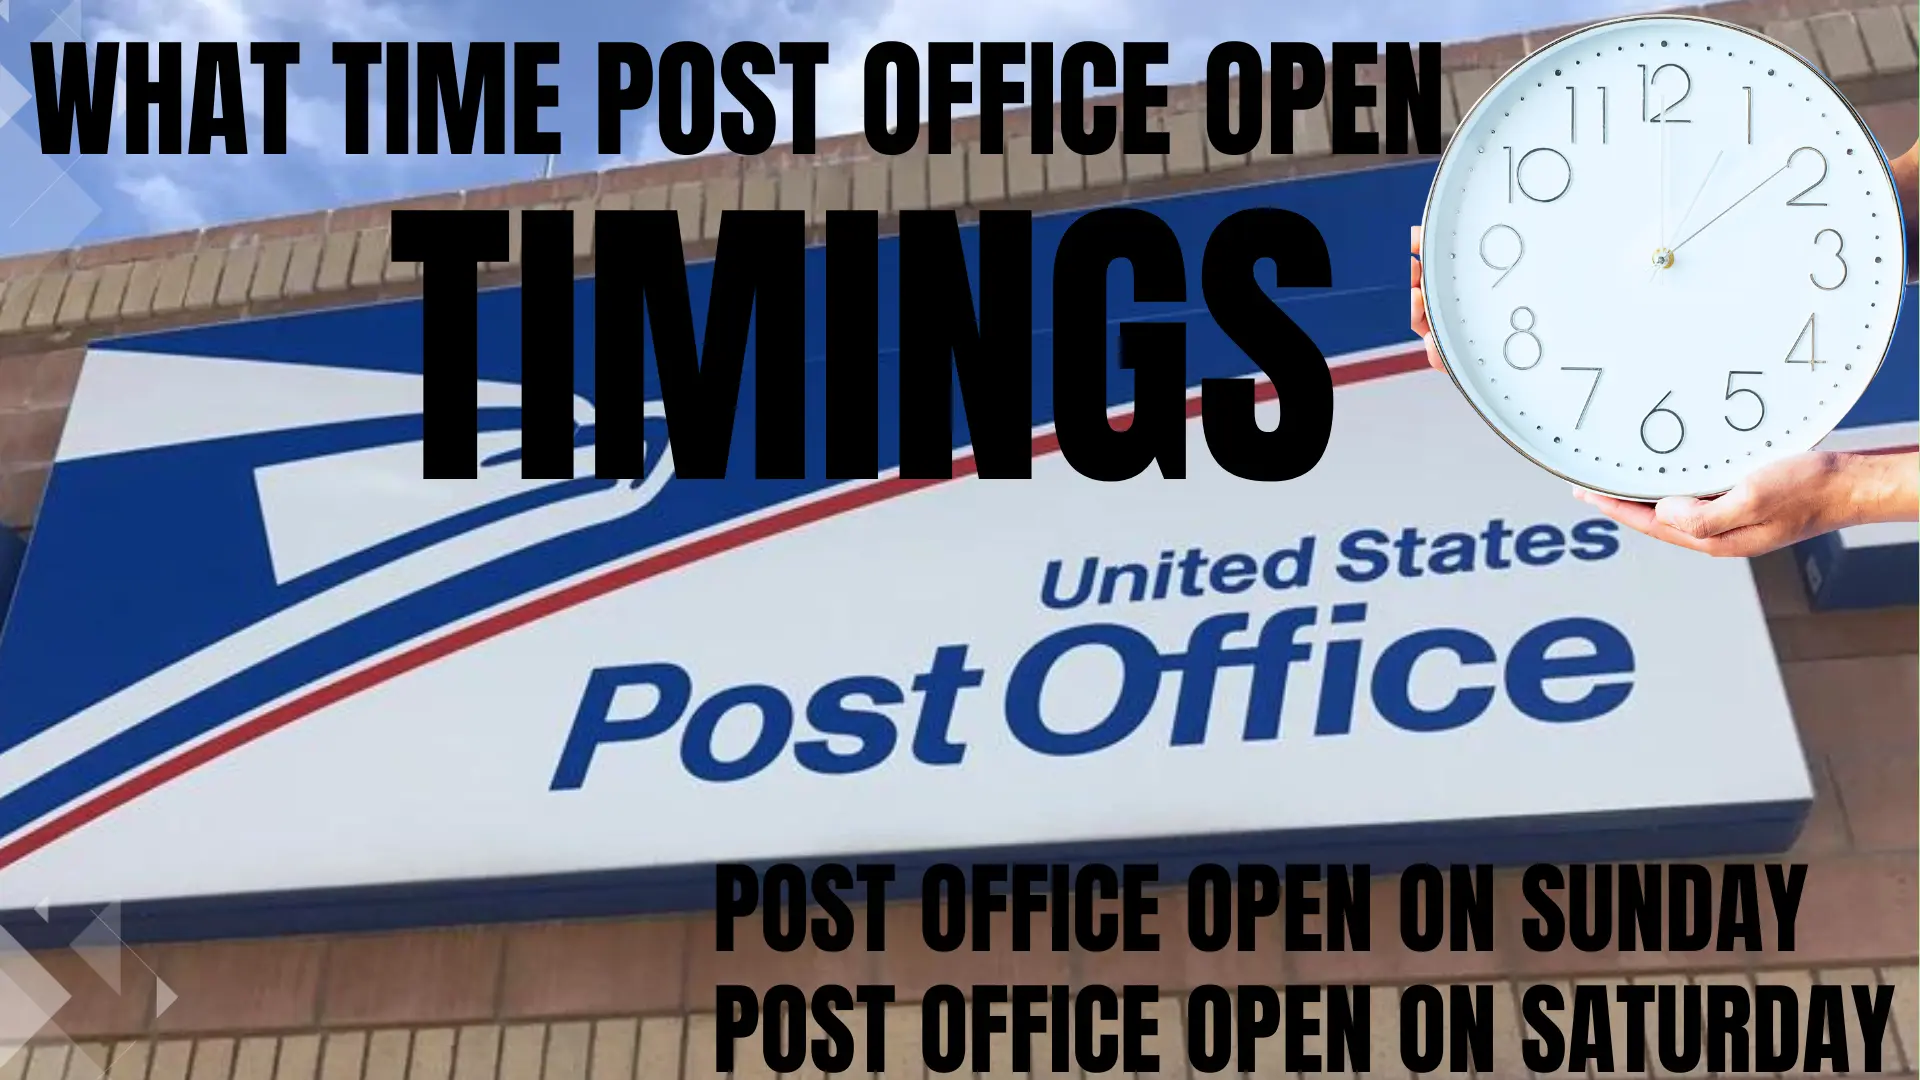 post offices open on saturday